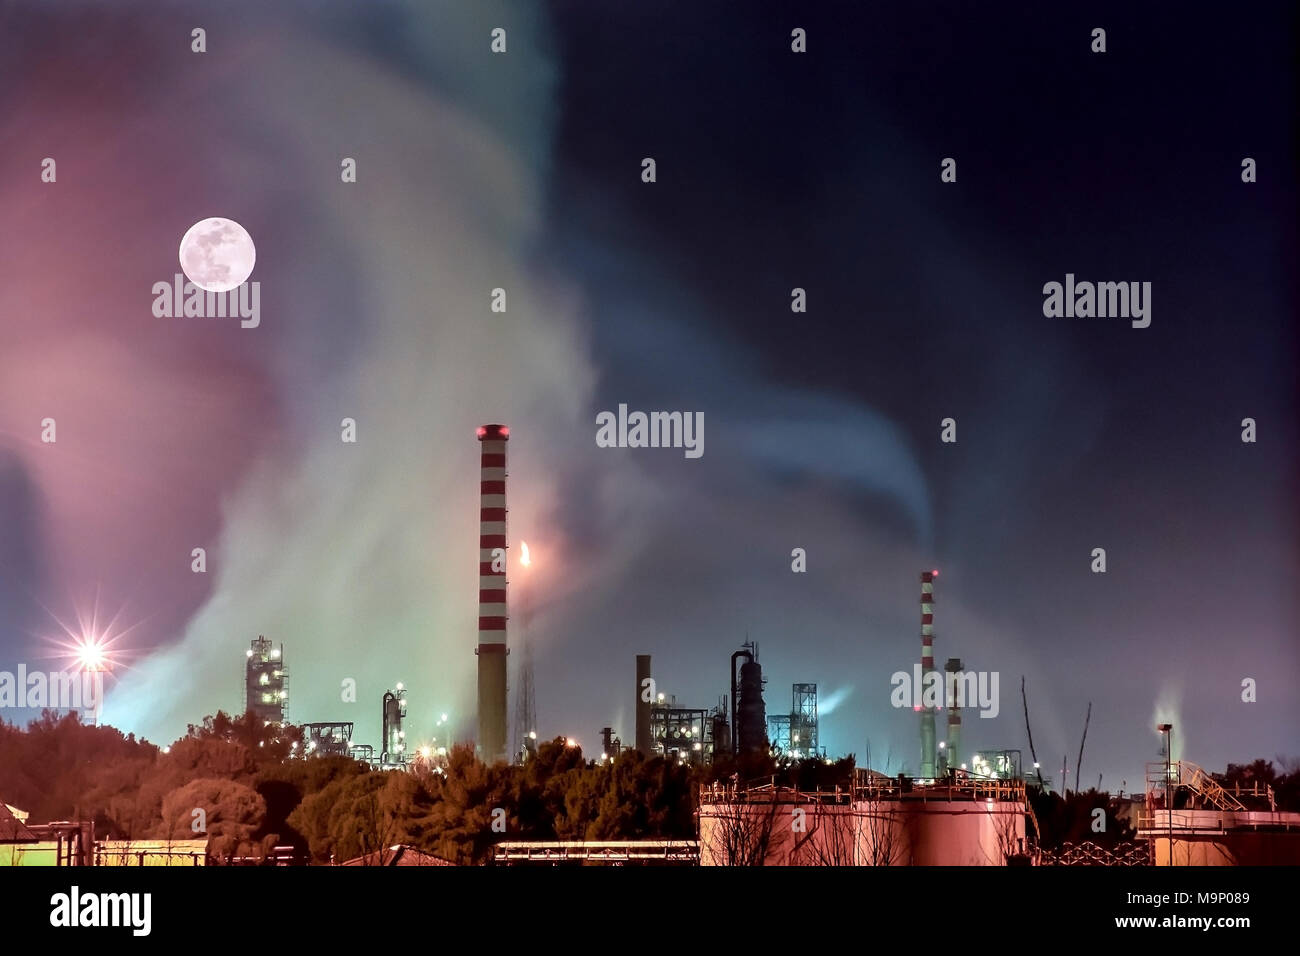 Air pollution produced by an oil factory, Livorno, Tuscany, Italy Stock Photo